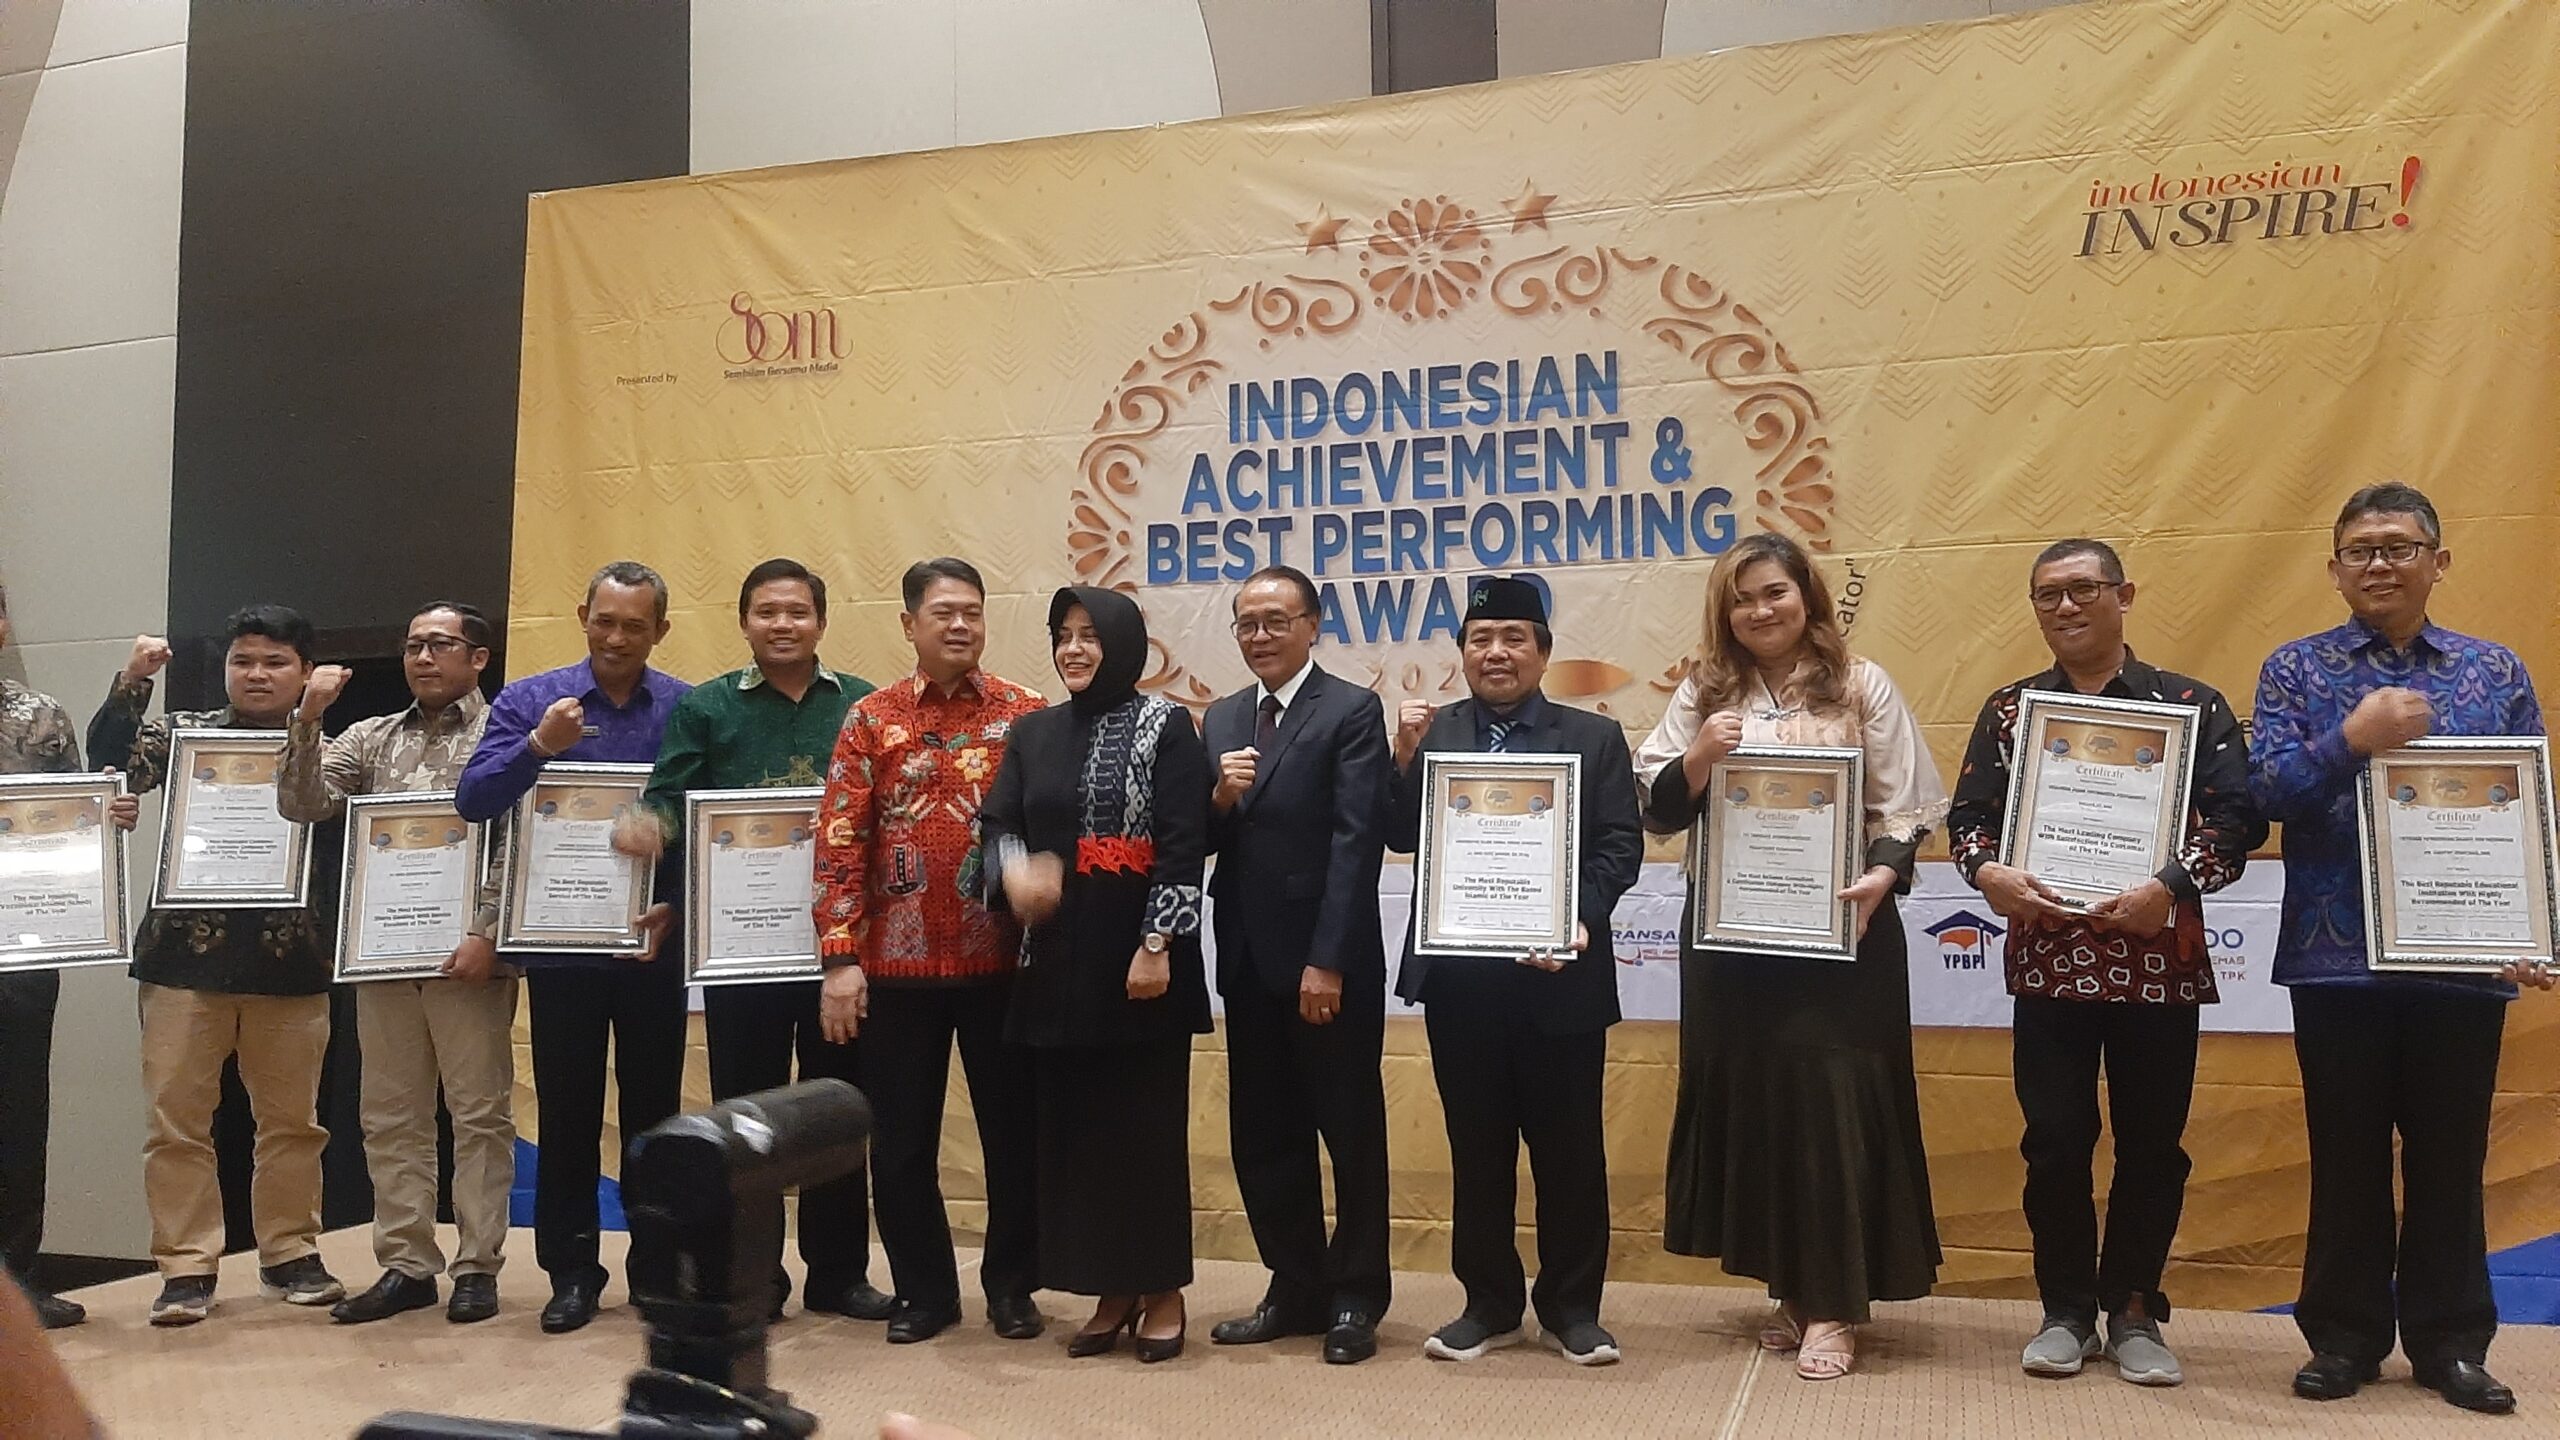 Semakin di Depan, UNZAH Meraih Indonesia Achievement & Best Performing Award 2022 Kategori The Most Reputable University With The Best Islamic Best of The Year